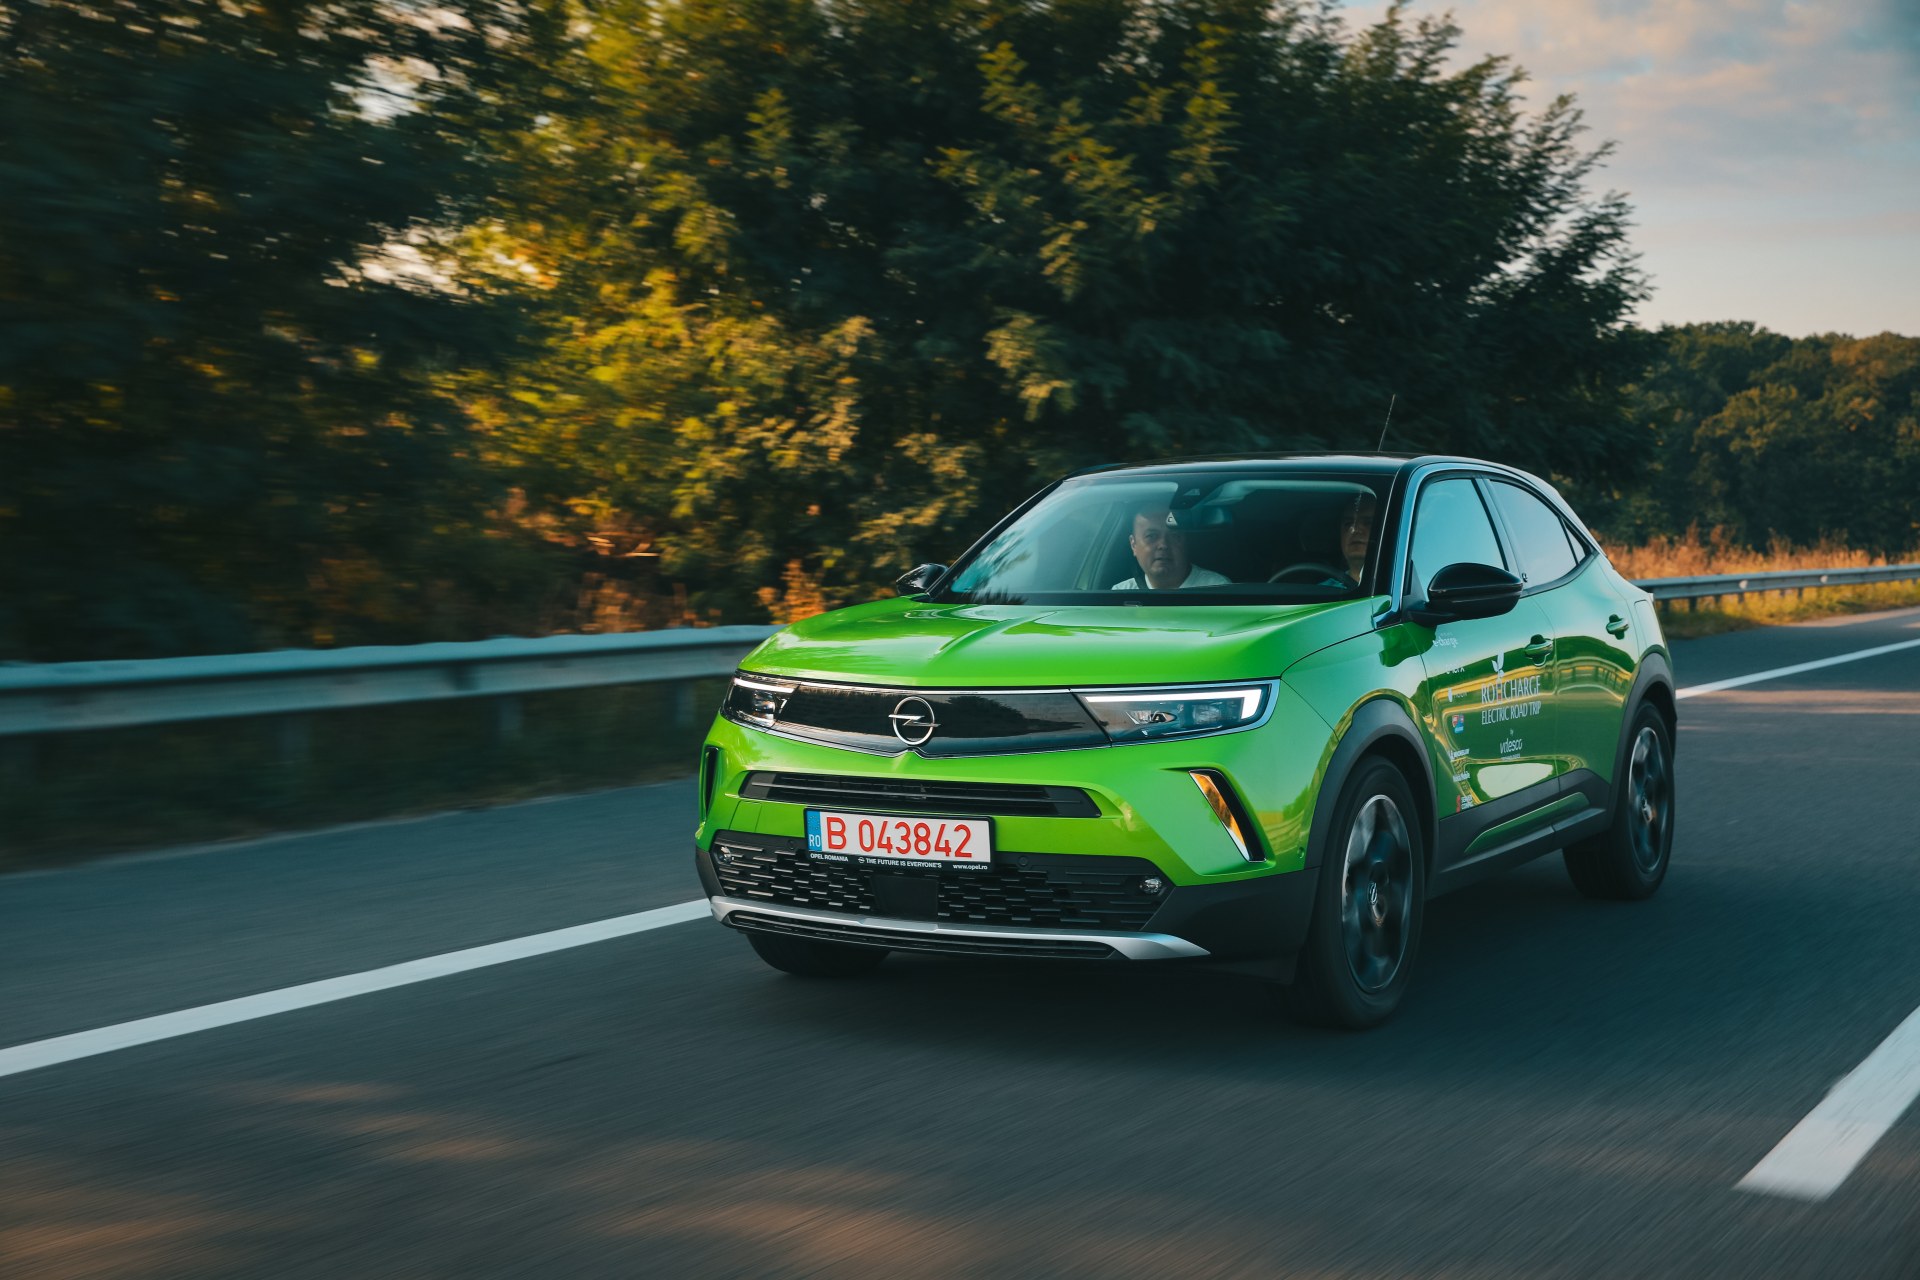 Driven: 2021 Opel Mokka-e, the First Electric Crossover from Opel